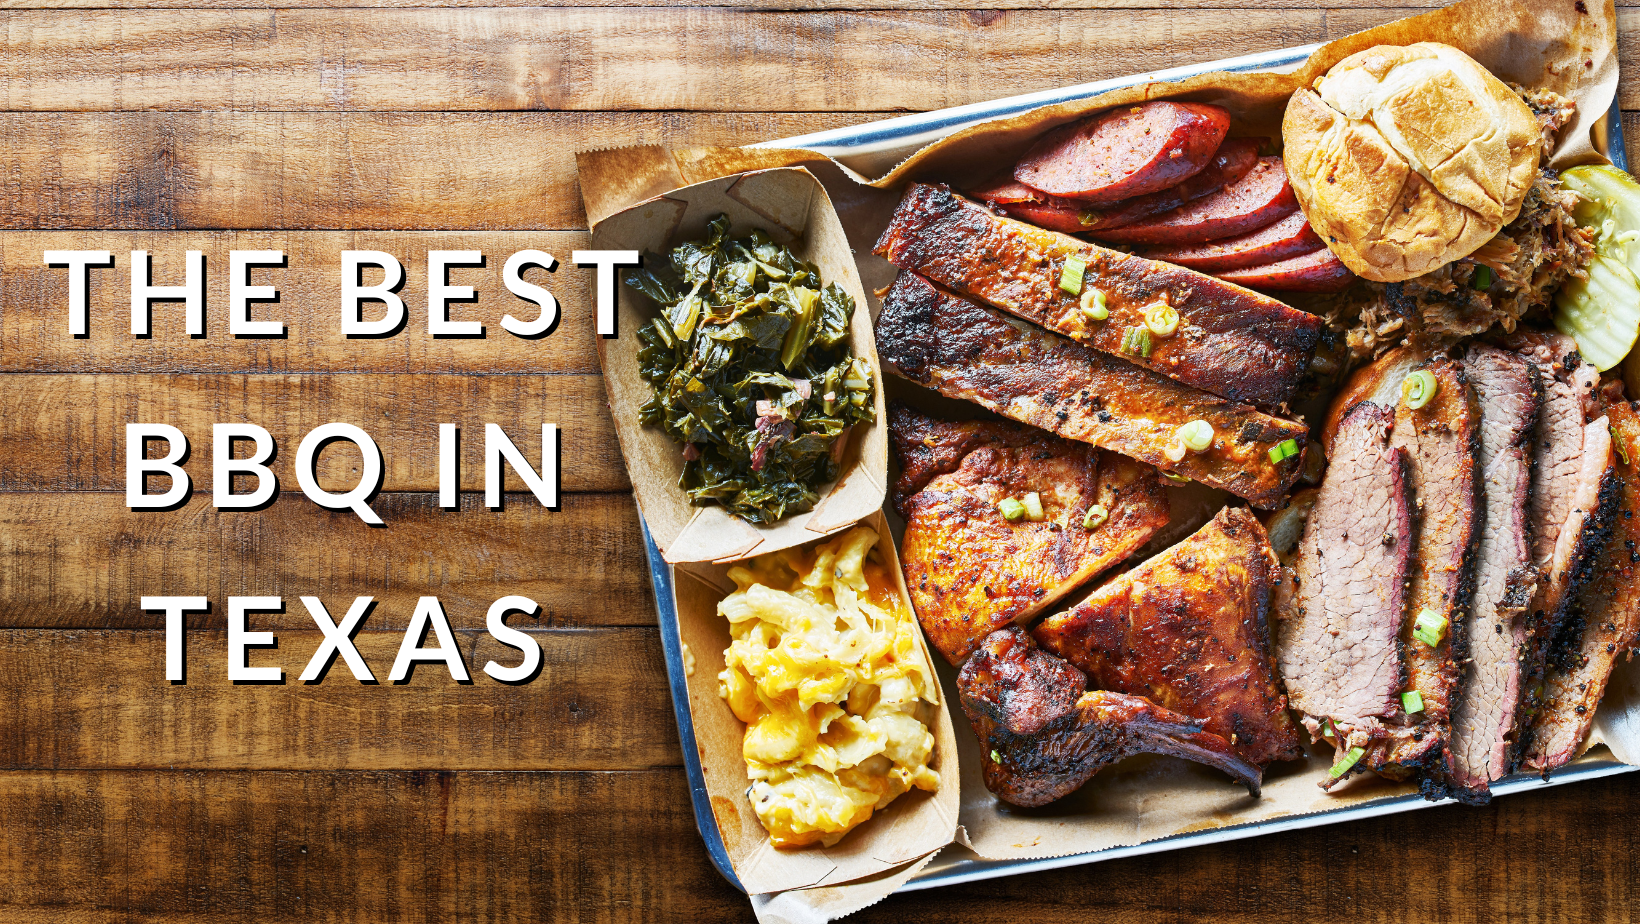 "The Best BBQ in Texas" text over an image of a tray with barbecue meats and sides